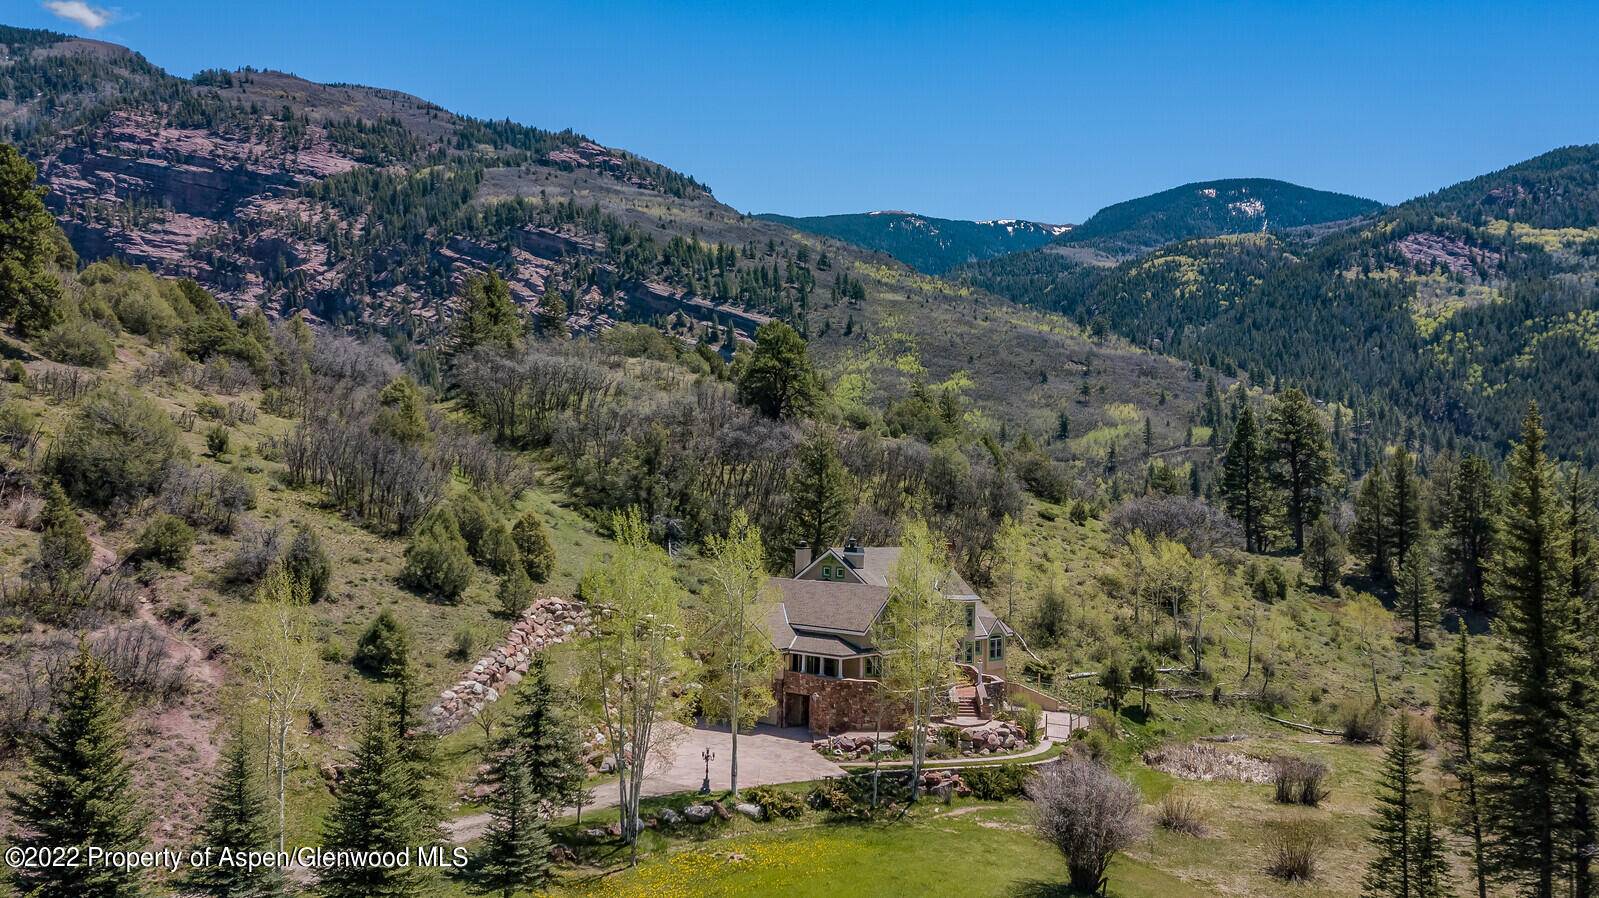 A rare opportunity to own 160 acres in the Crystal Valley.